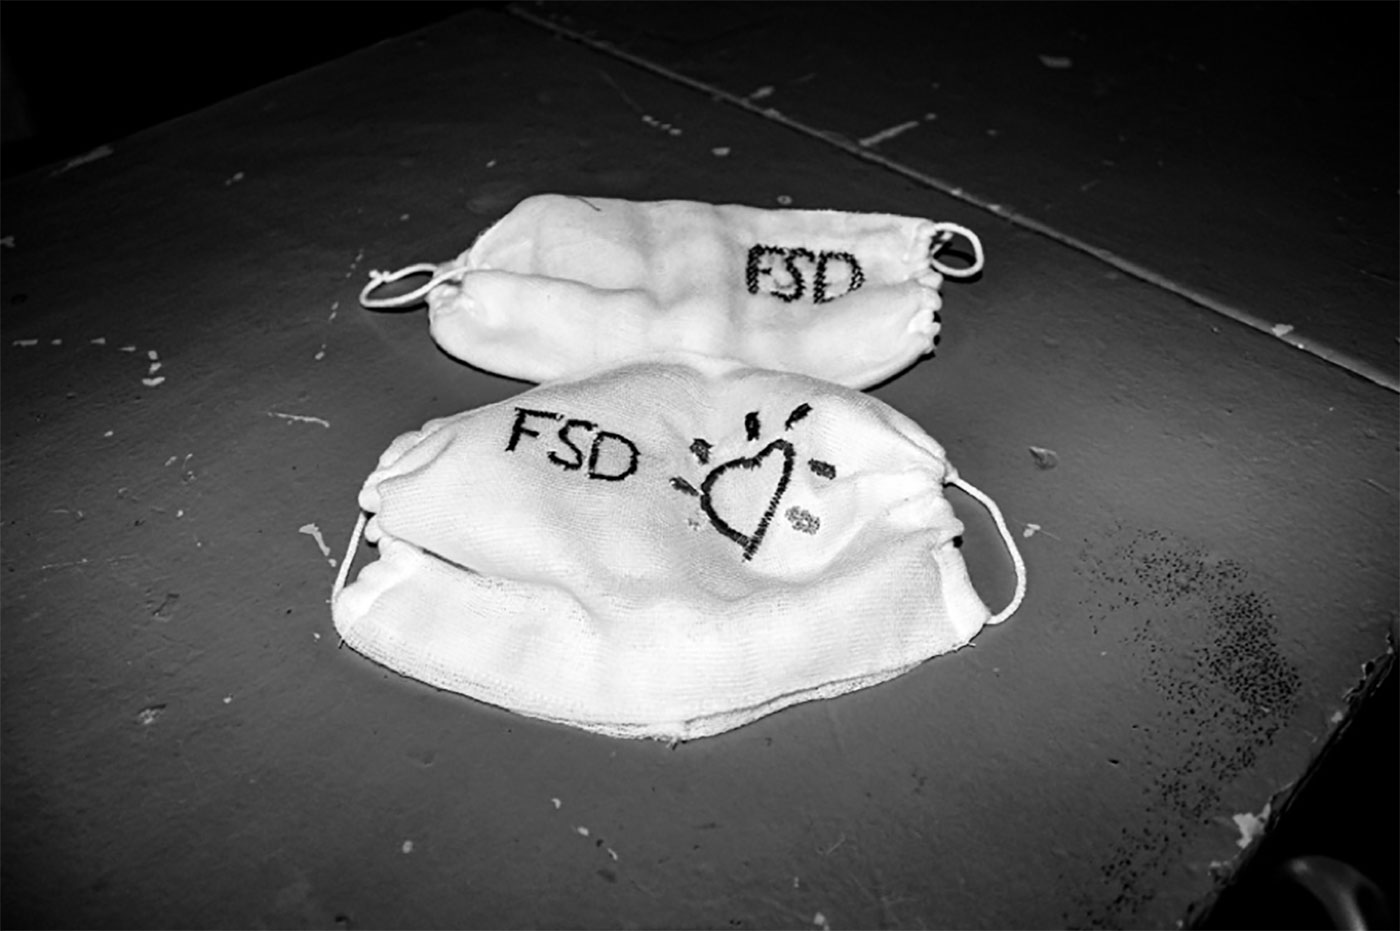 reusable masks in Ukraine with FSD